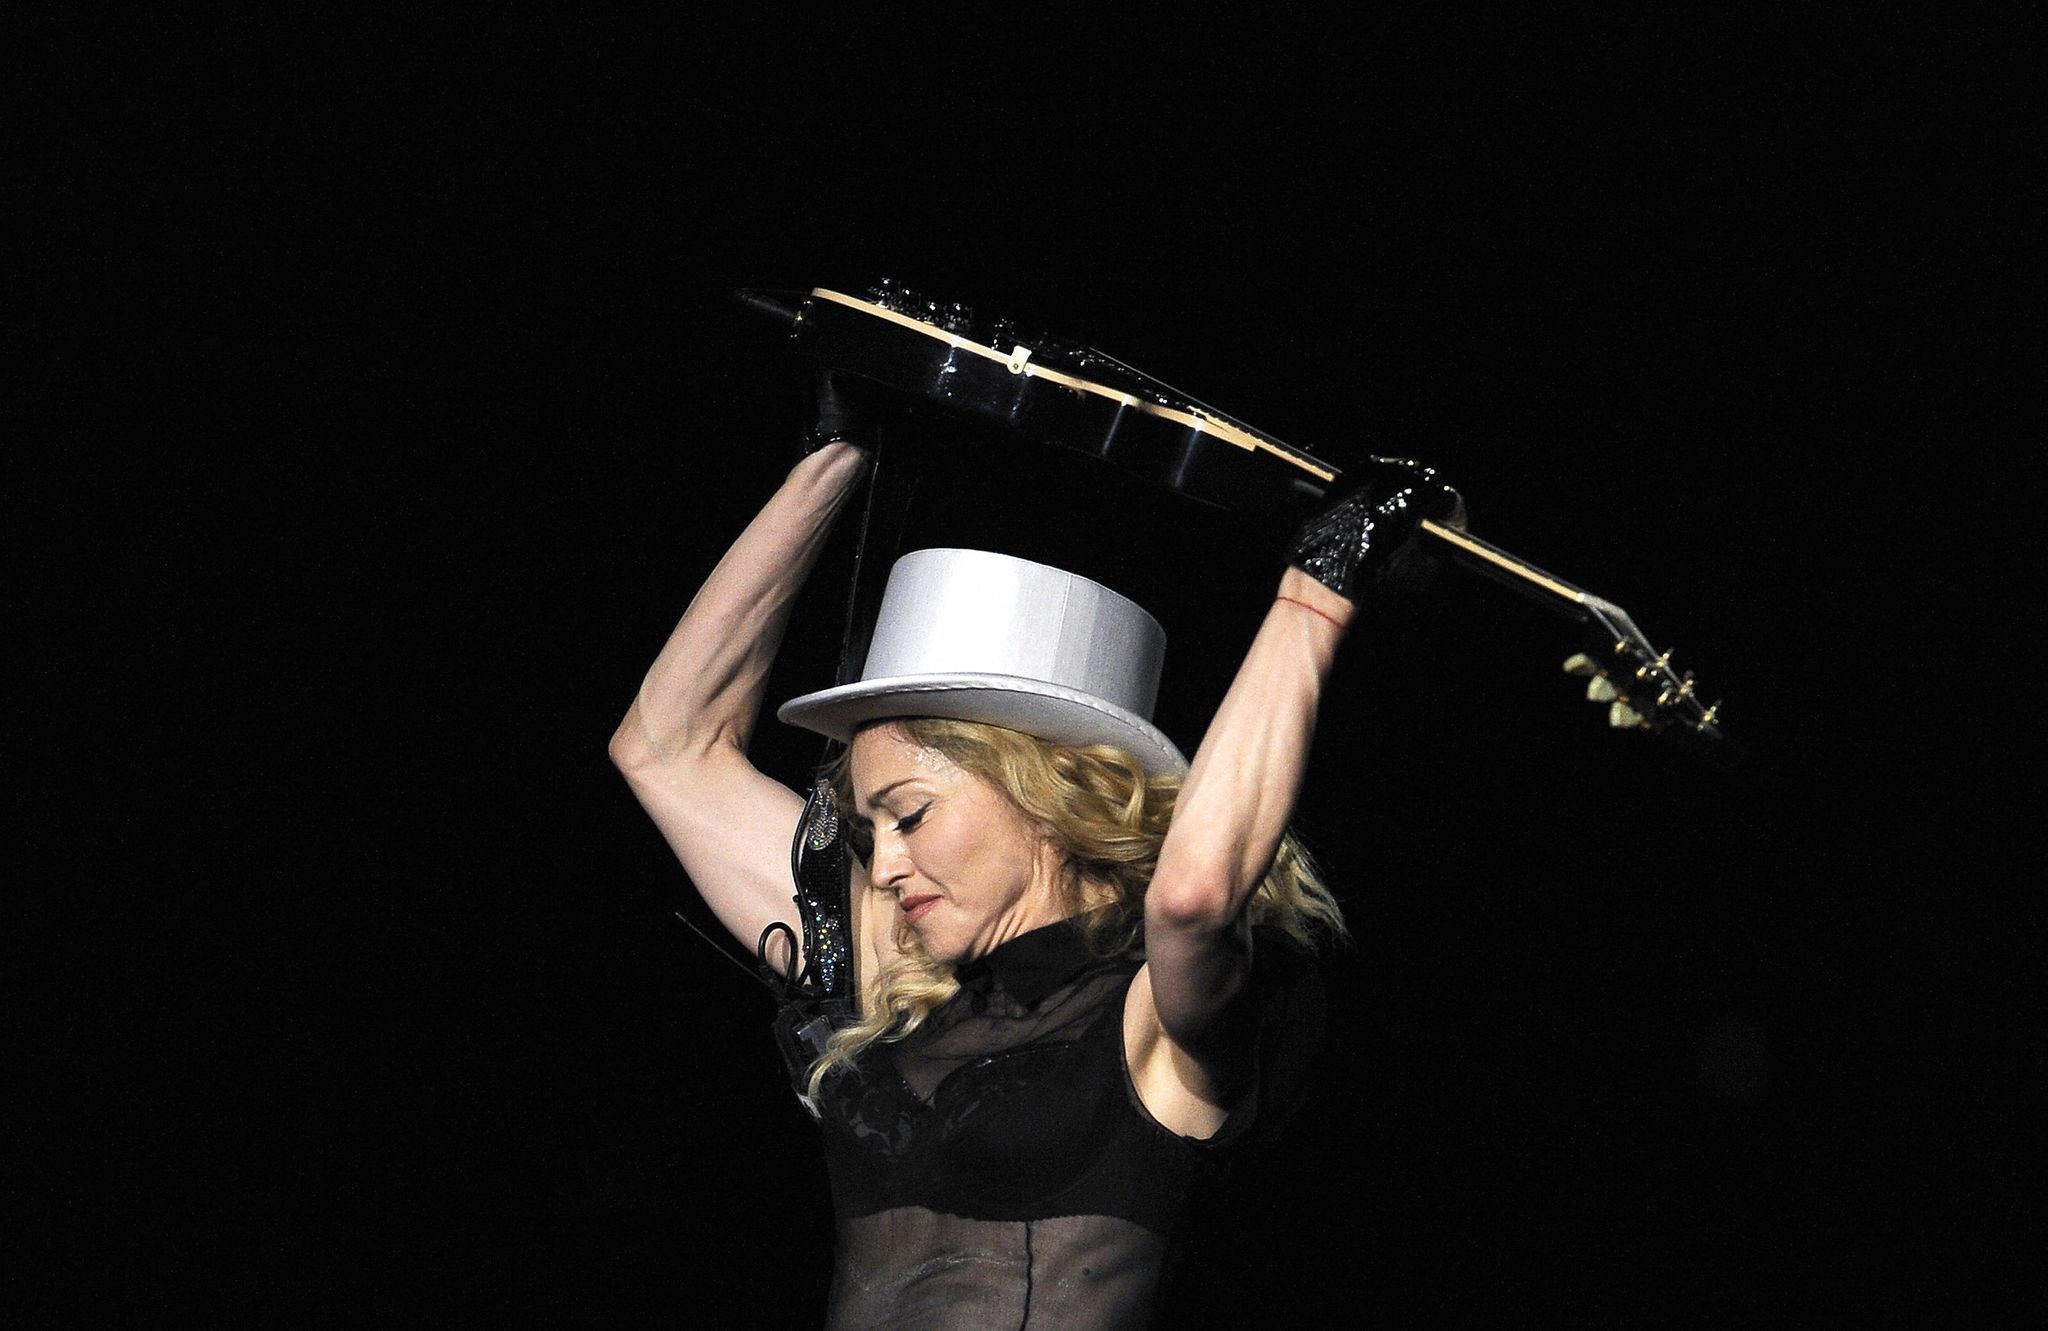 Photography, Headgear, Hand, Performance, Flash photography, Musical instrument, Hat, 